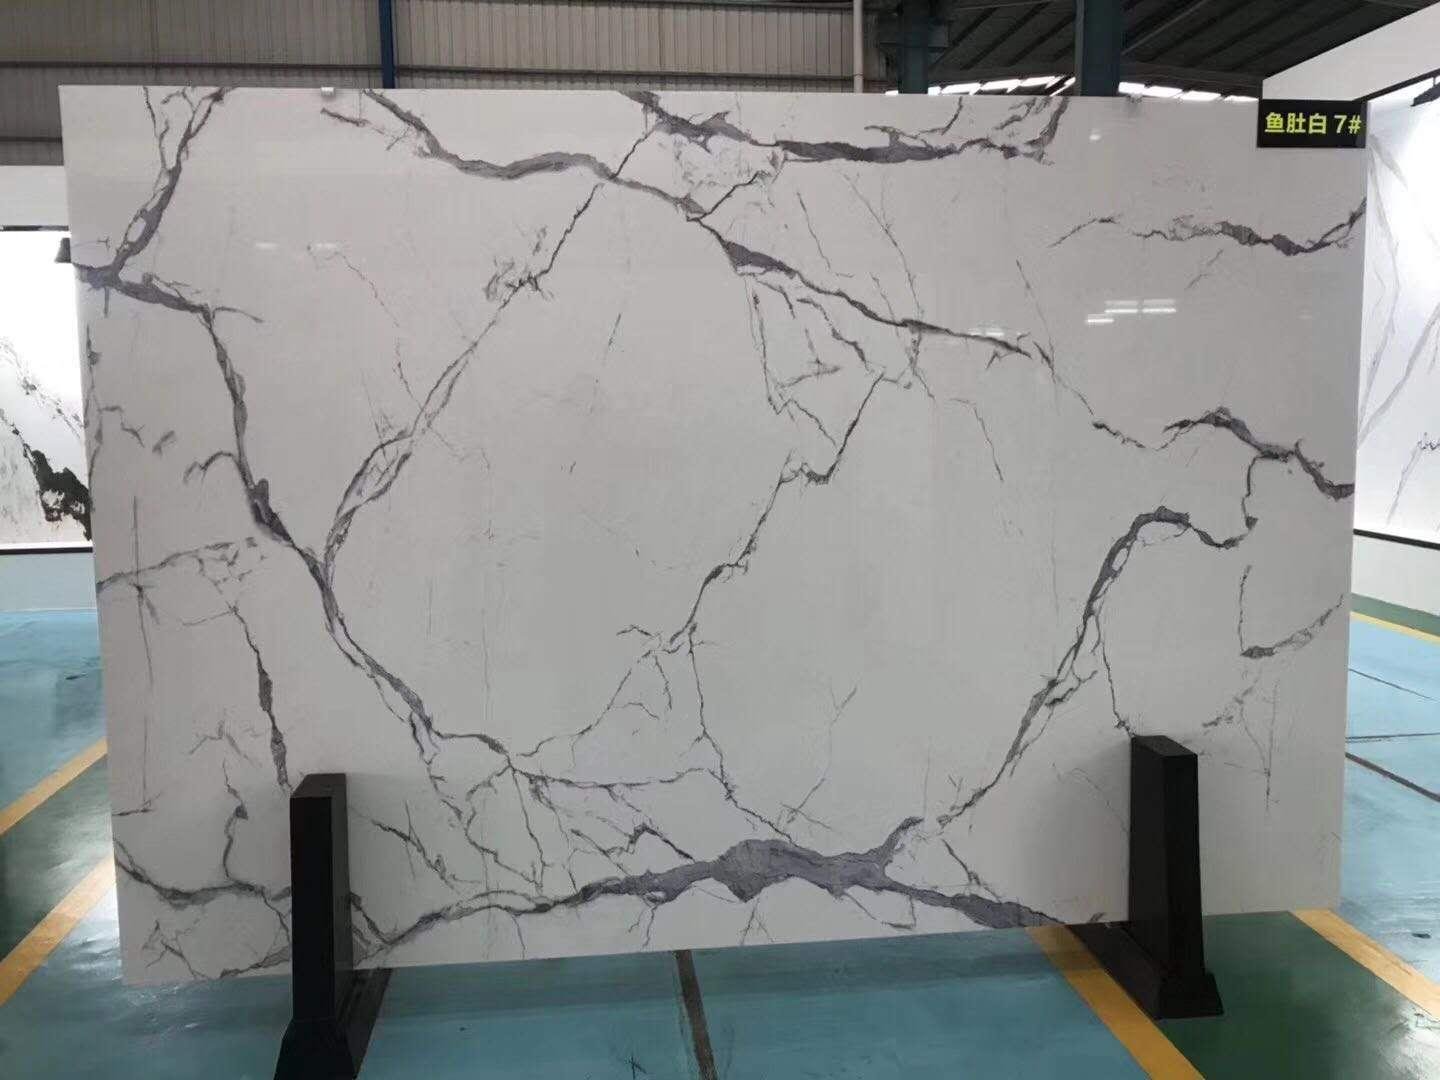 marble stone 3D print artificial marble slabs 3